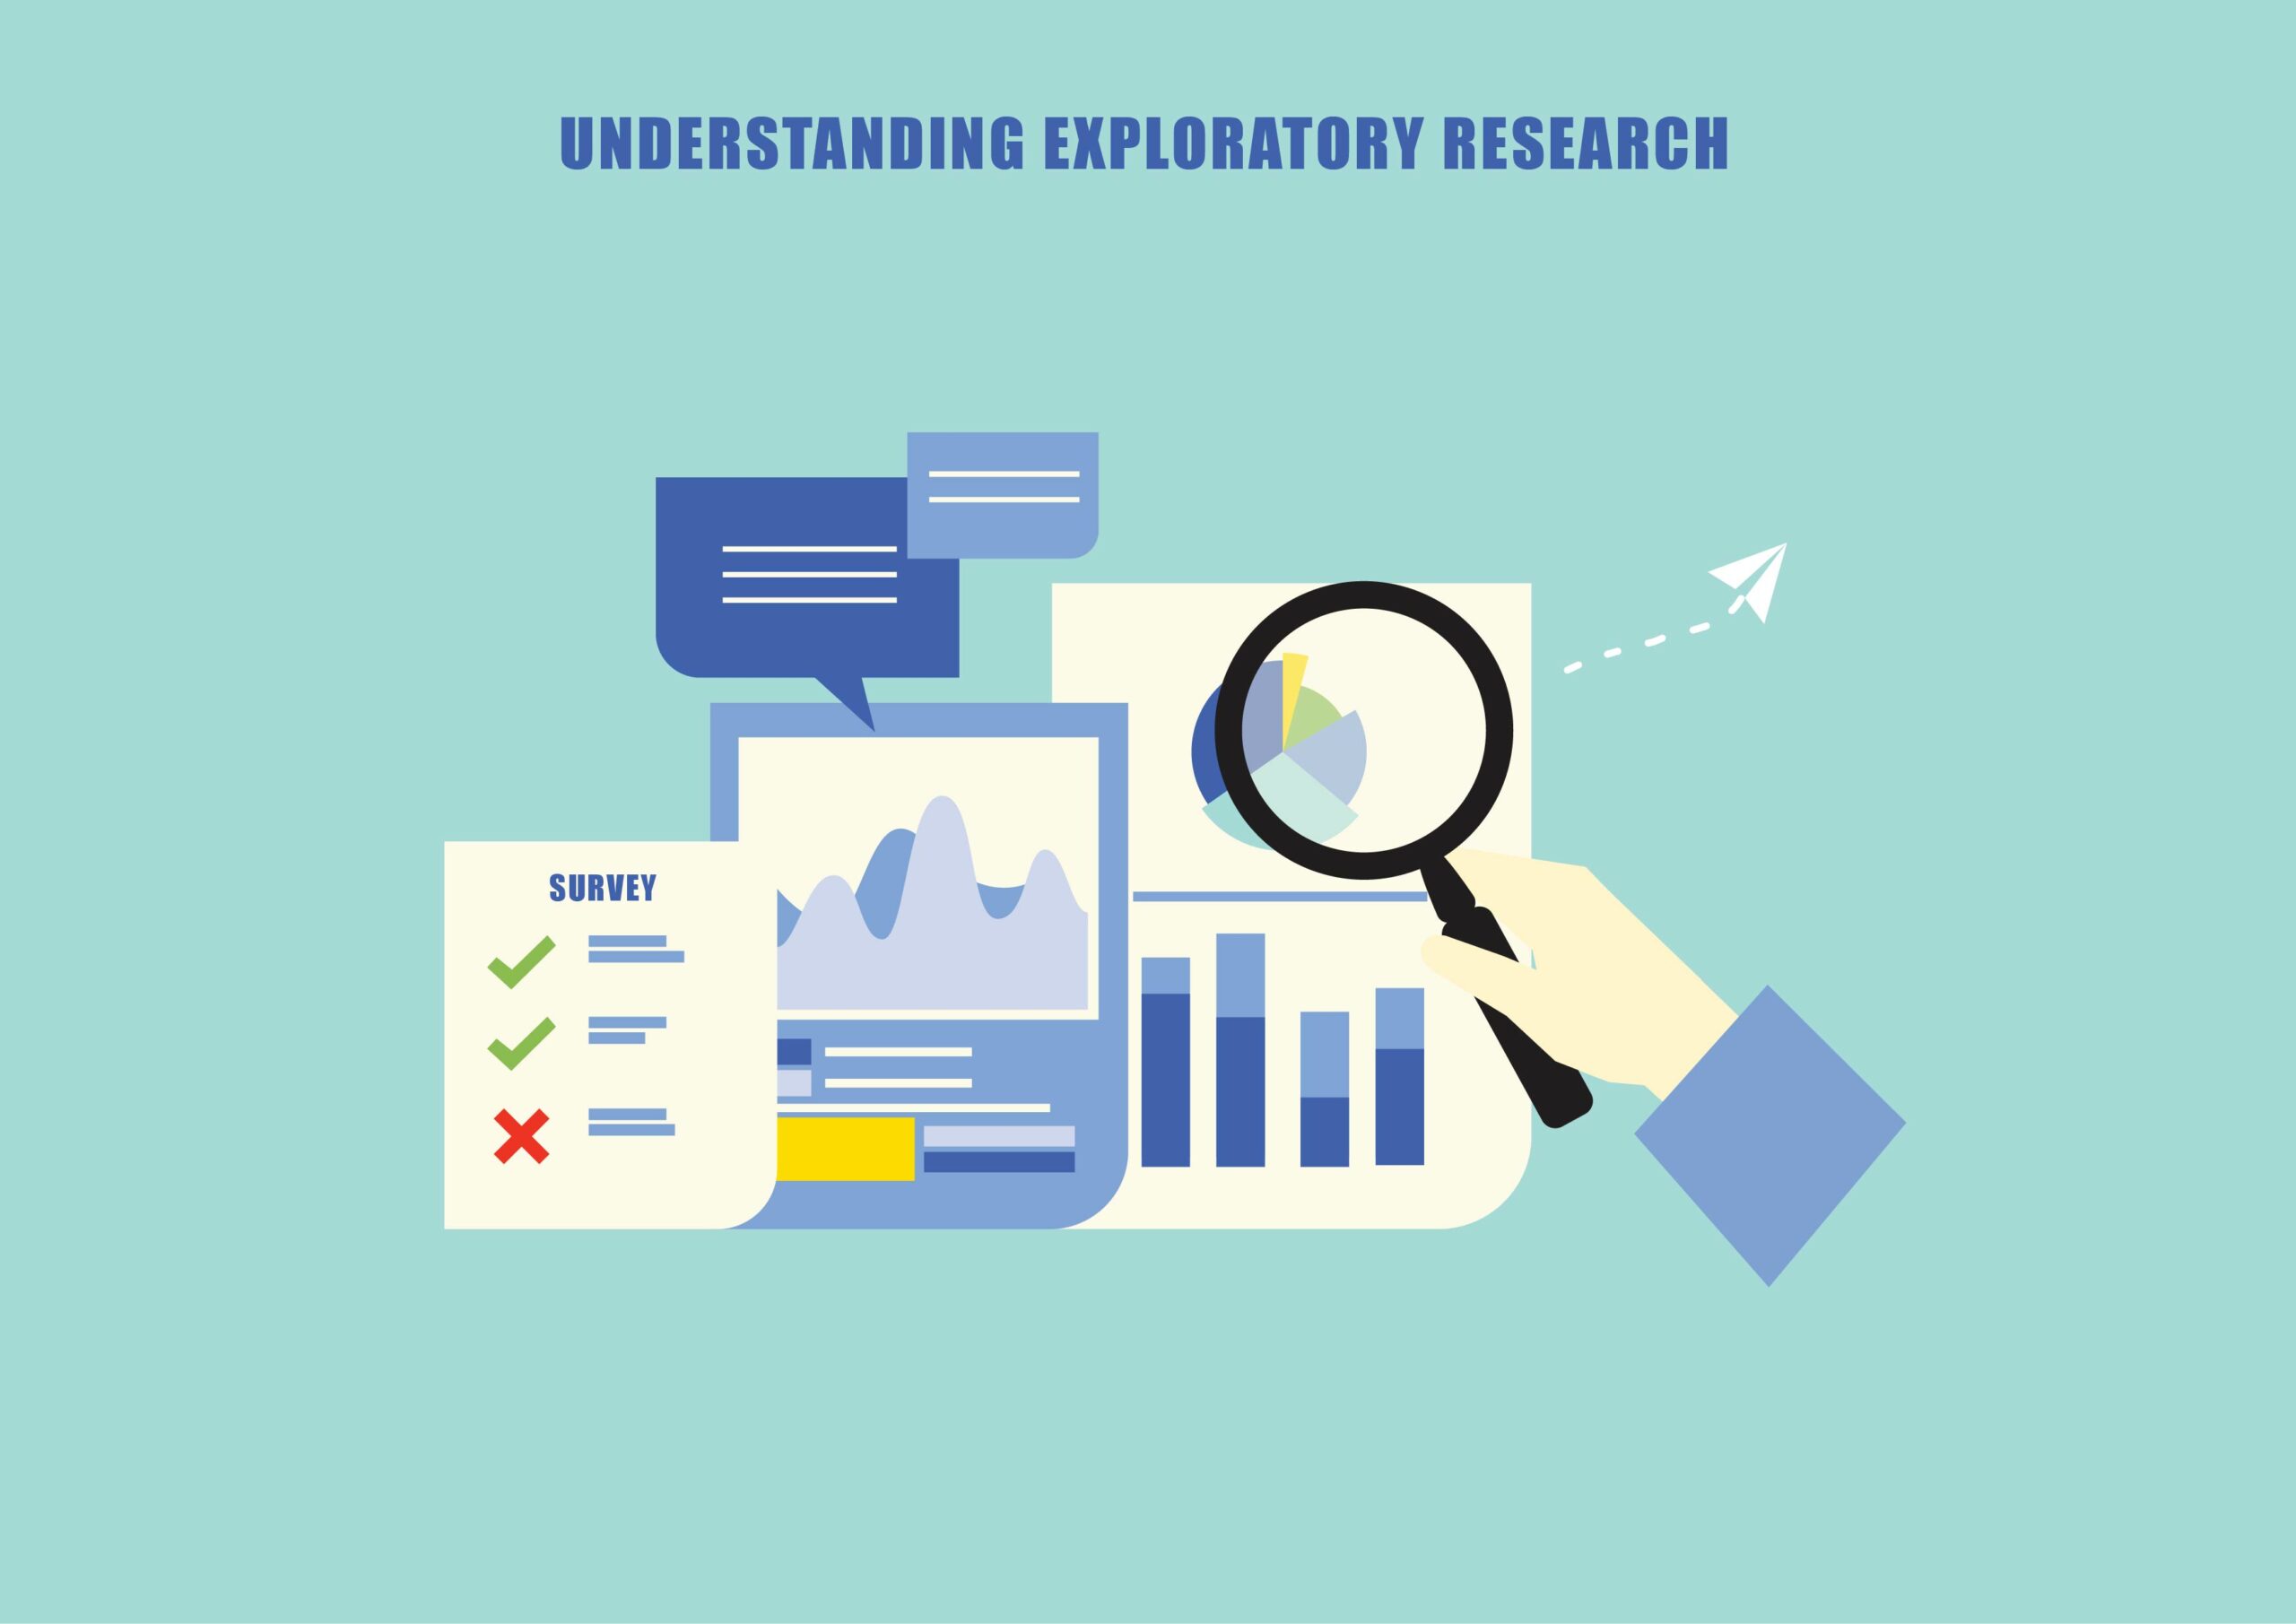 a exploratory research meaning